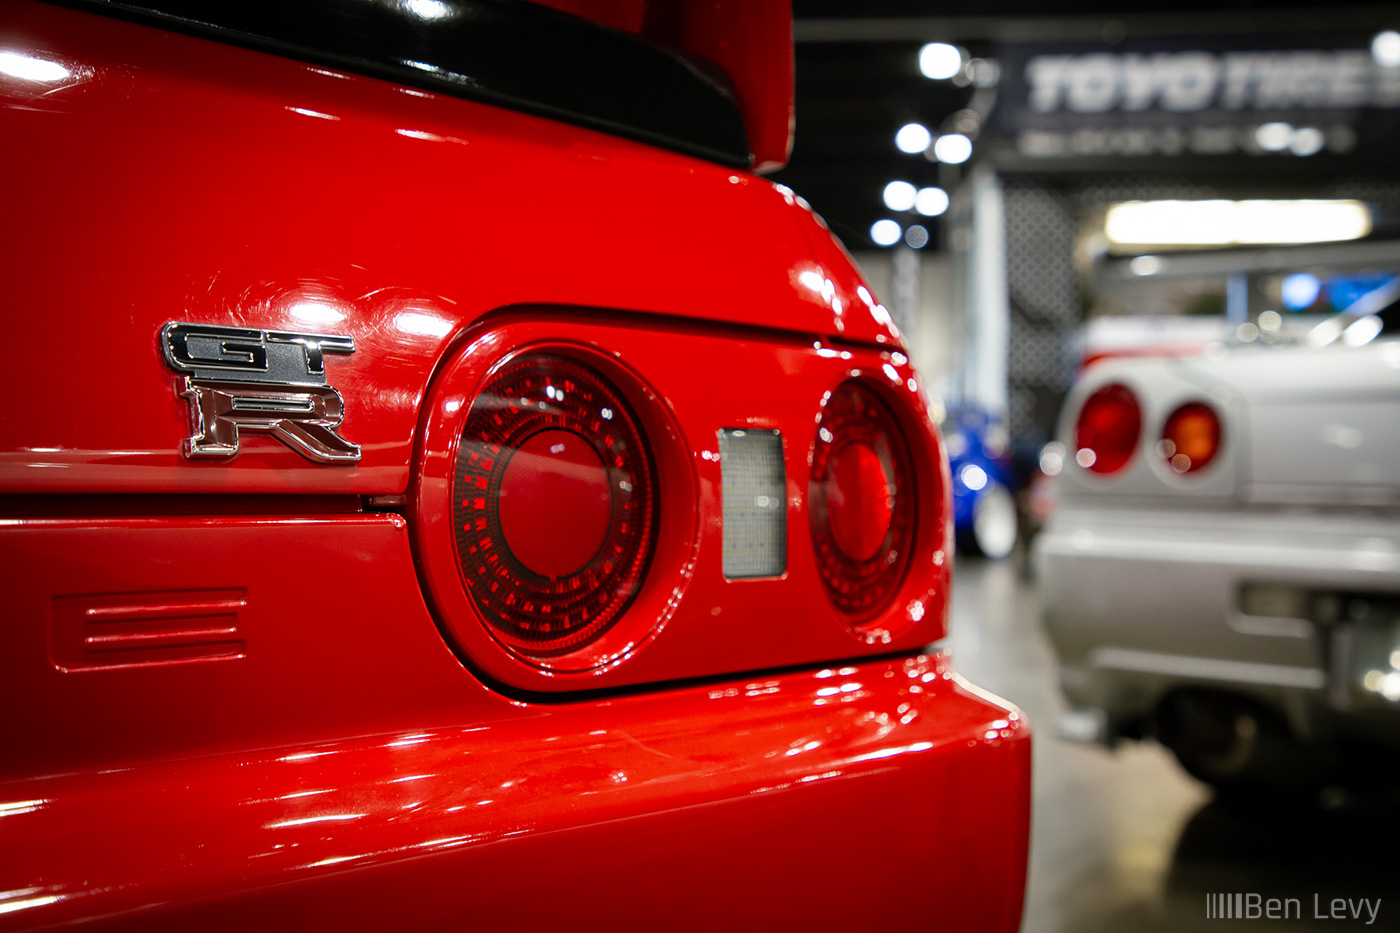 GT-R Badge on Rear of Red R32 Skyline